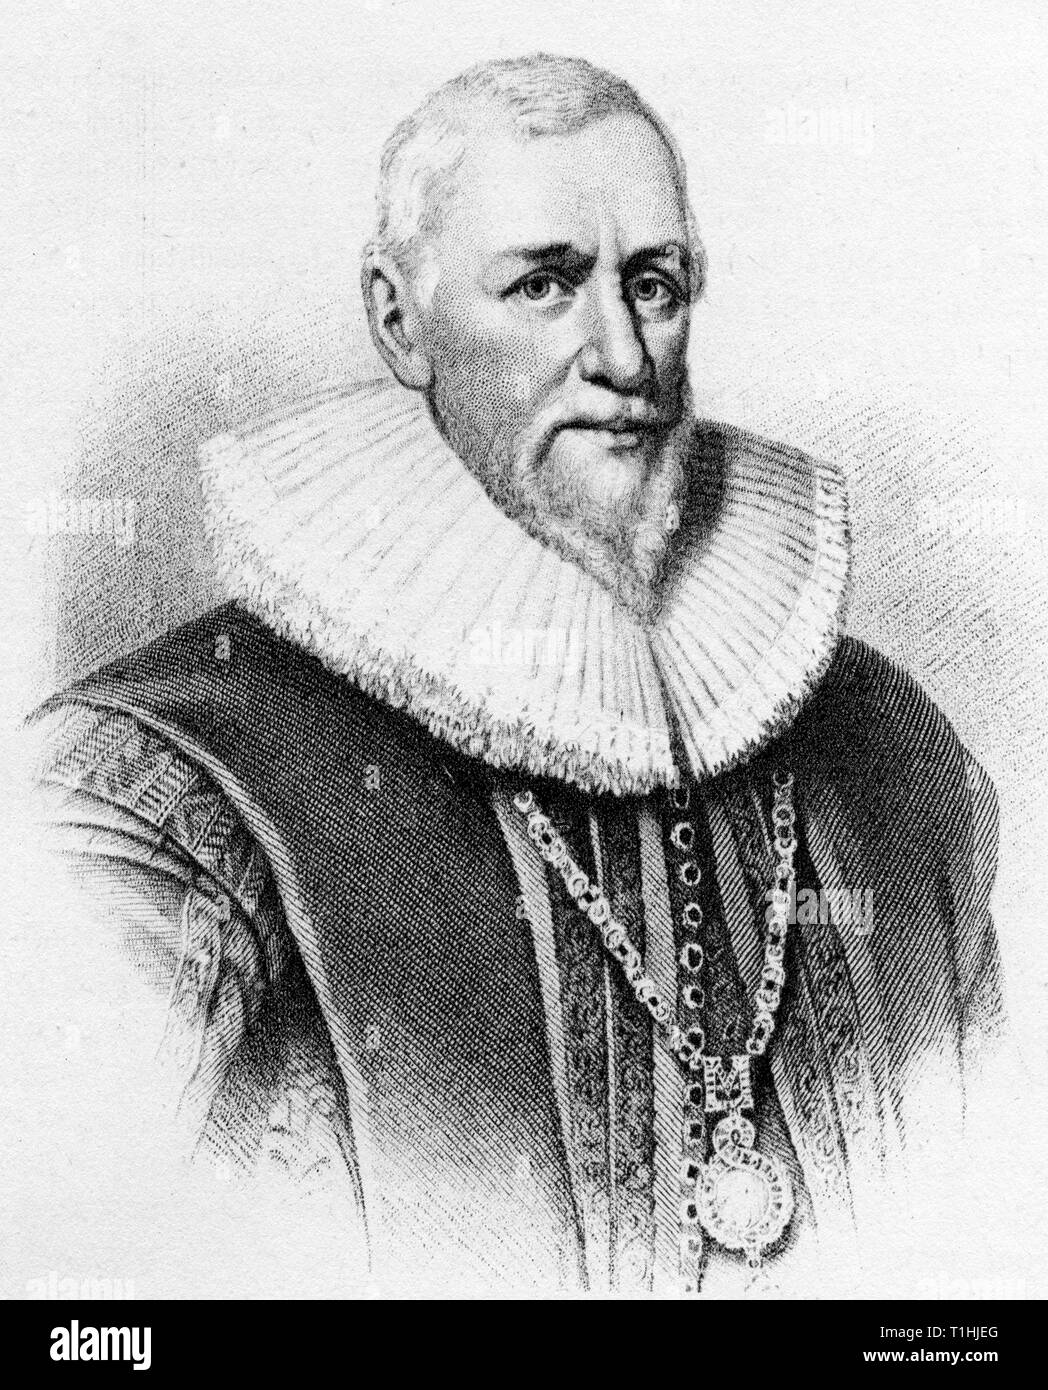 Sir Hugh Myddleton, 1st Baronet (1560-1631). Engraving taken from 'Live of Engineers' by Samuel Smiles (1812-1904). Sir Hugh Myddleton is best remembered for having been the driving force behind the construction of the New River. Stock Photo